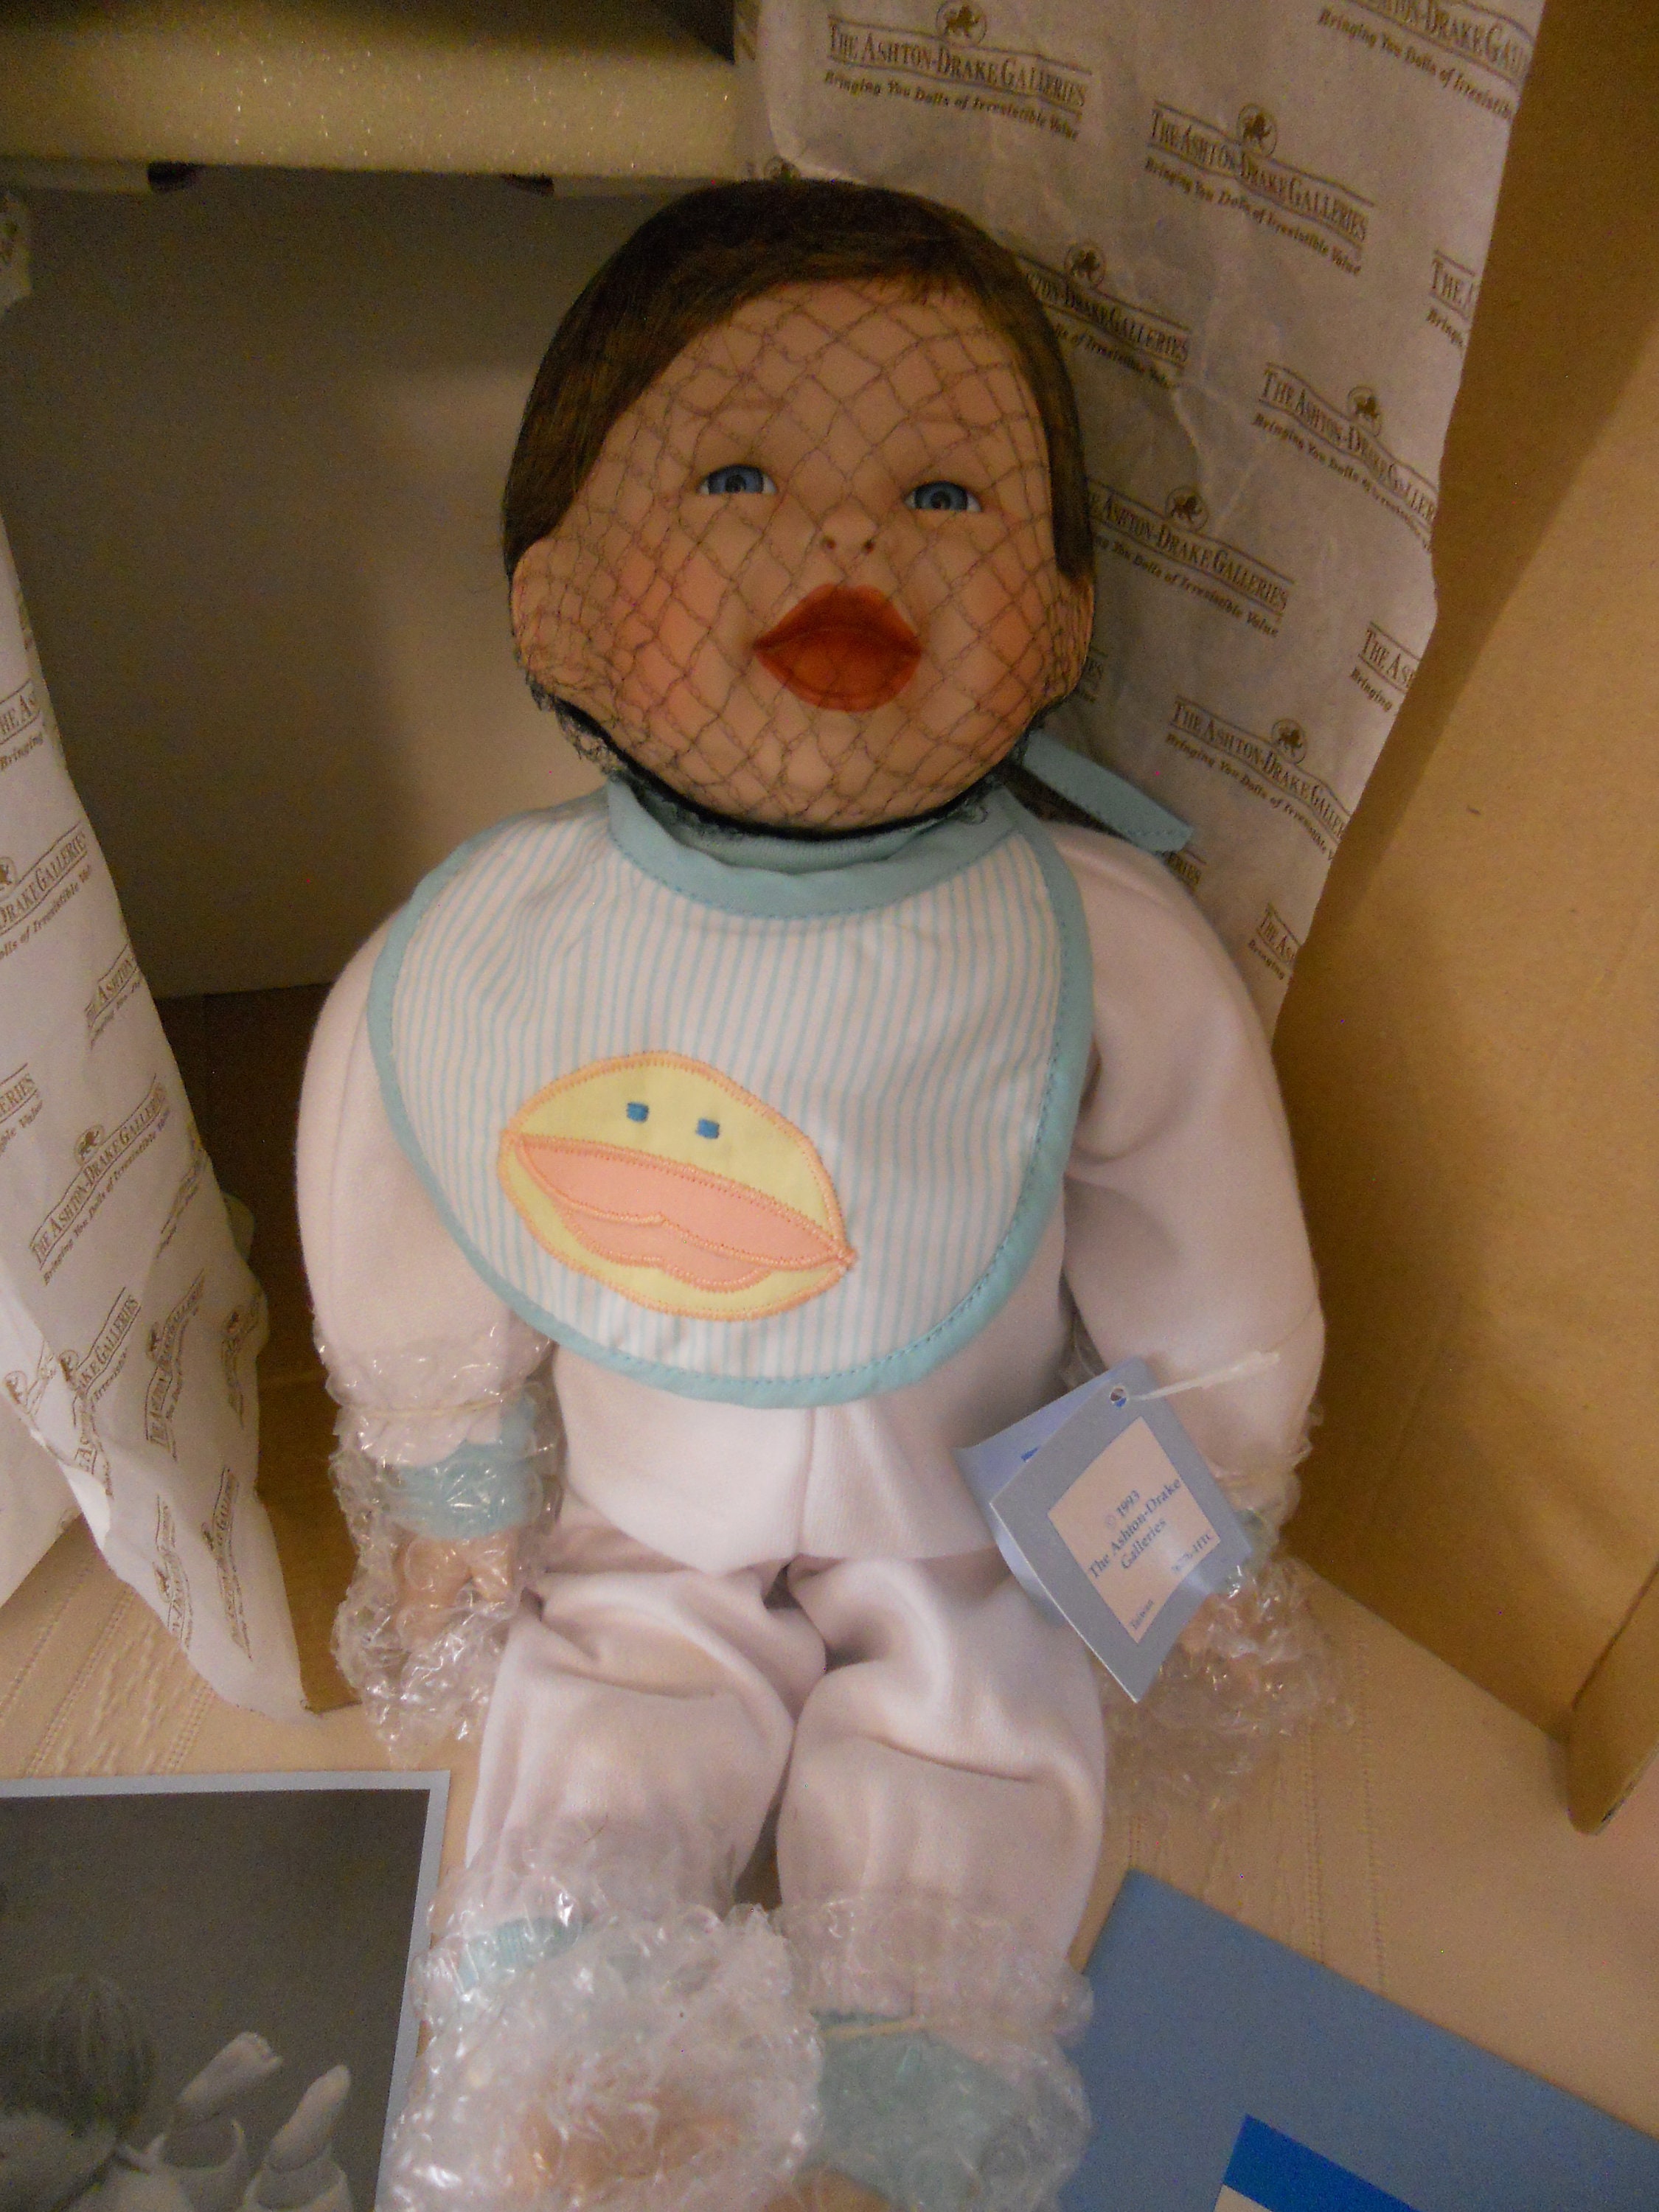 Patrick My First Playmate Porcelain Boy Doll 1993 Ashton-Drake Galleries 14 Certificate of Authenticity Original Box